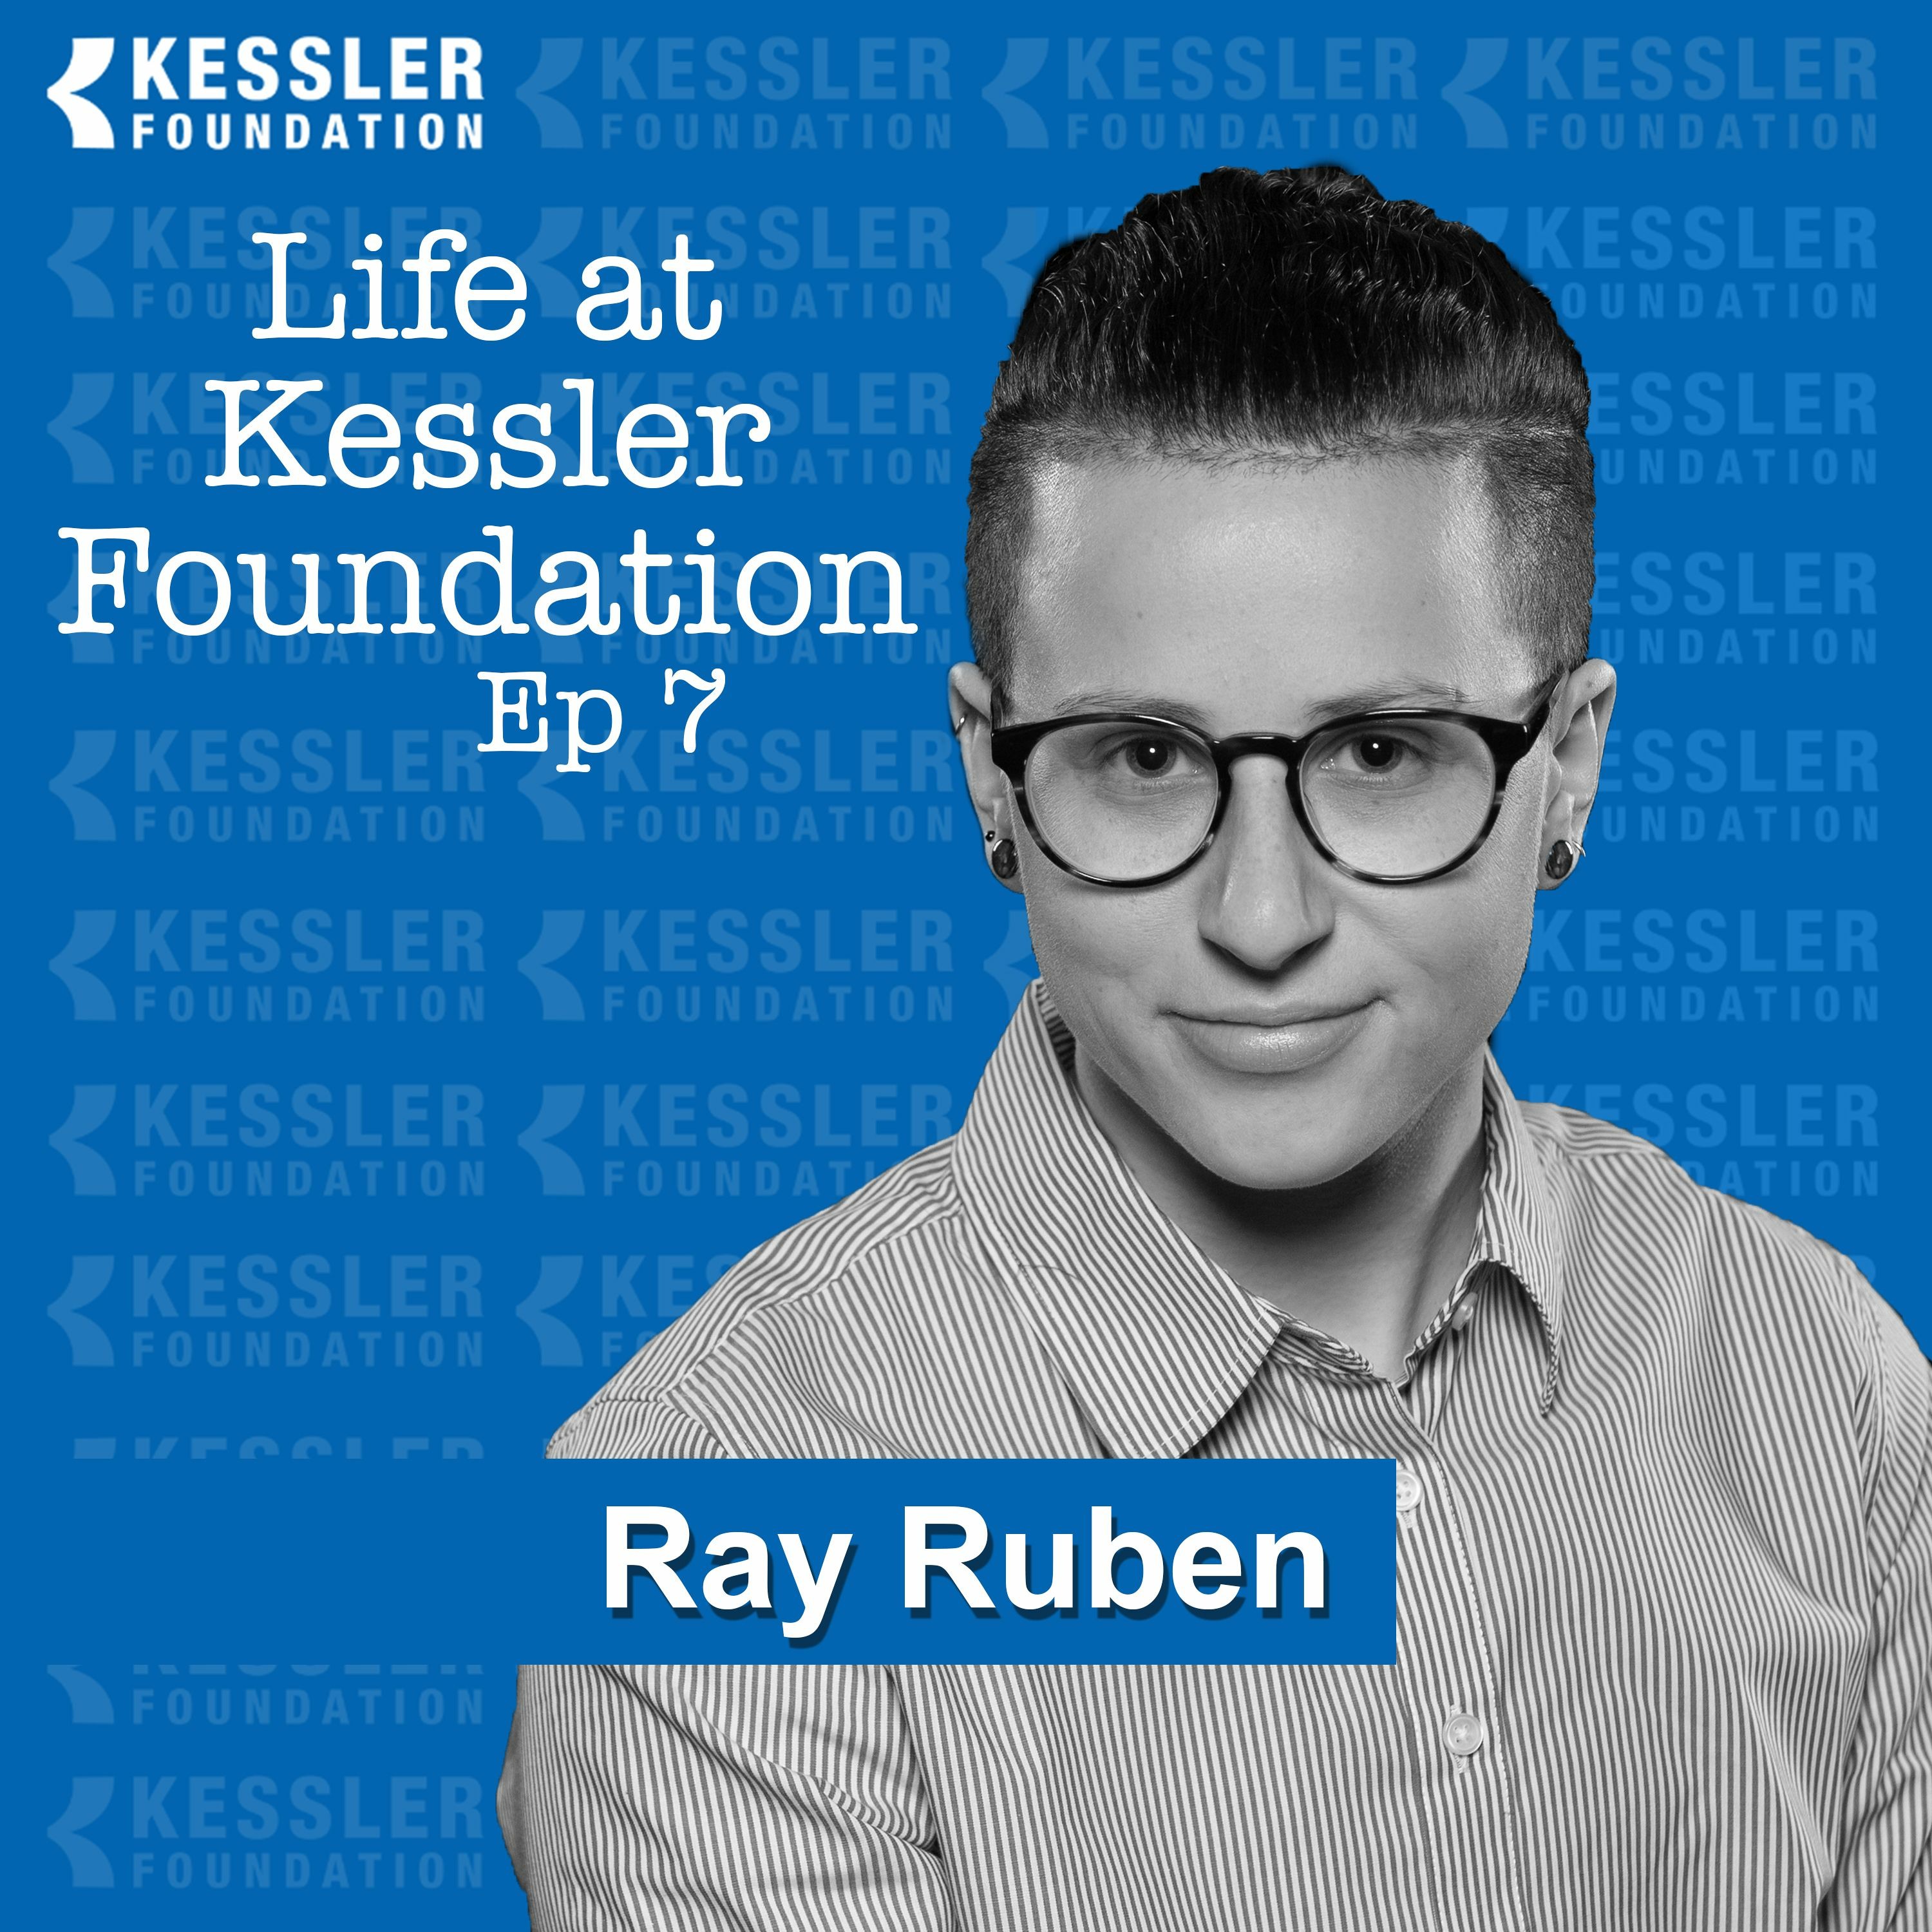 Ray Ruben: Recruiting and Motivating Participants for TBI and MS Research-Ep7